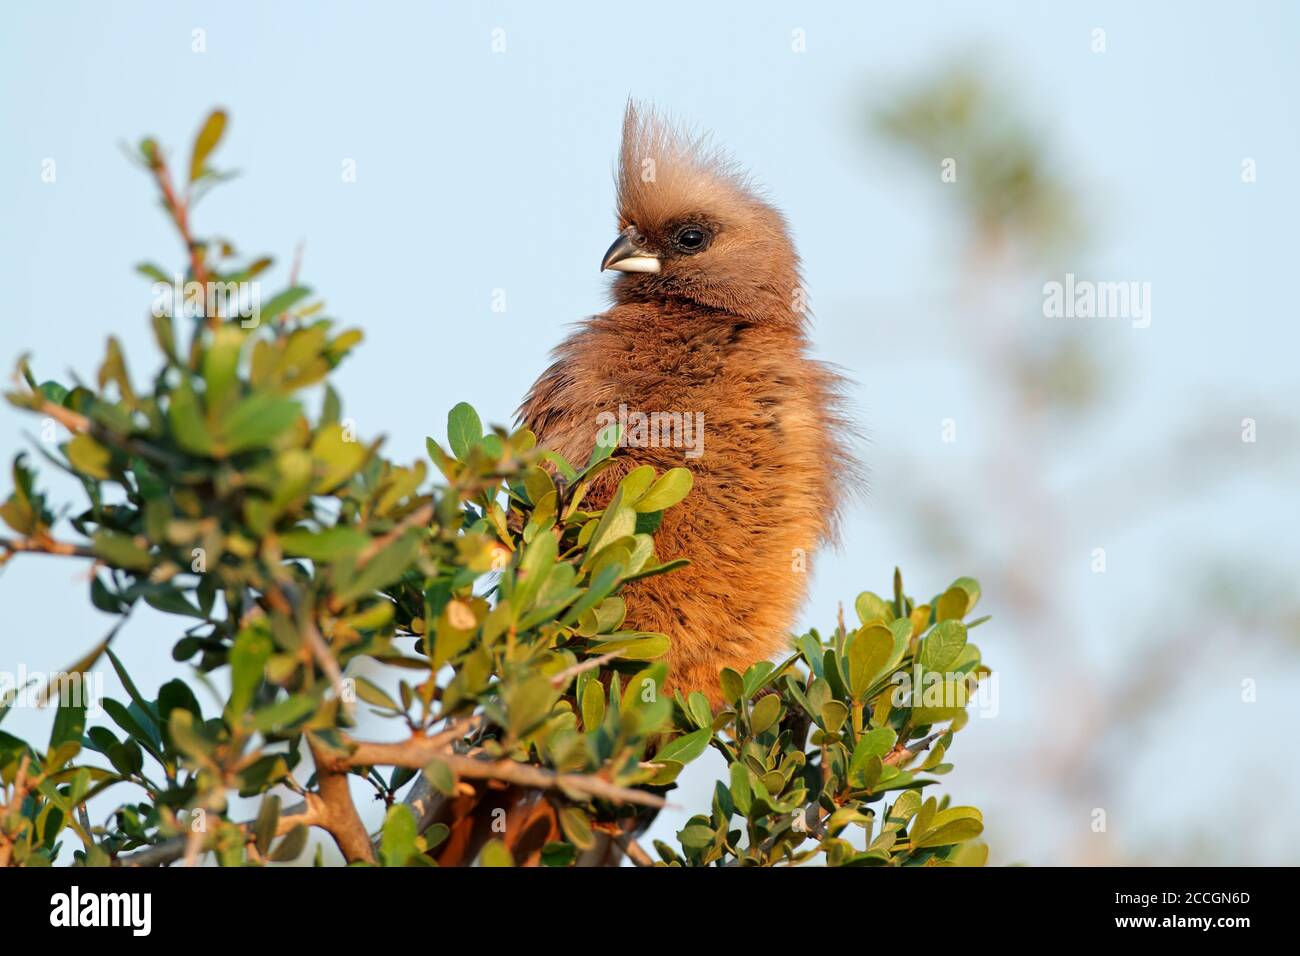 A speckled mousebird (Colius striatus) perched on a tree, South Africa Stock Photo